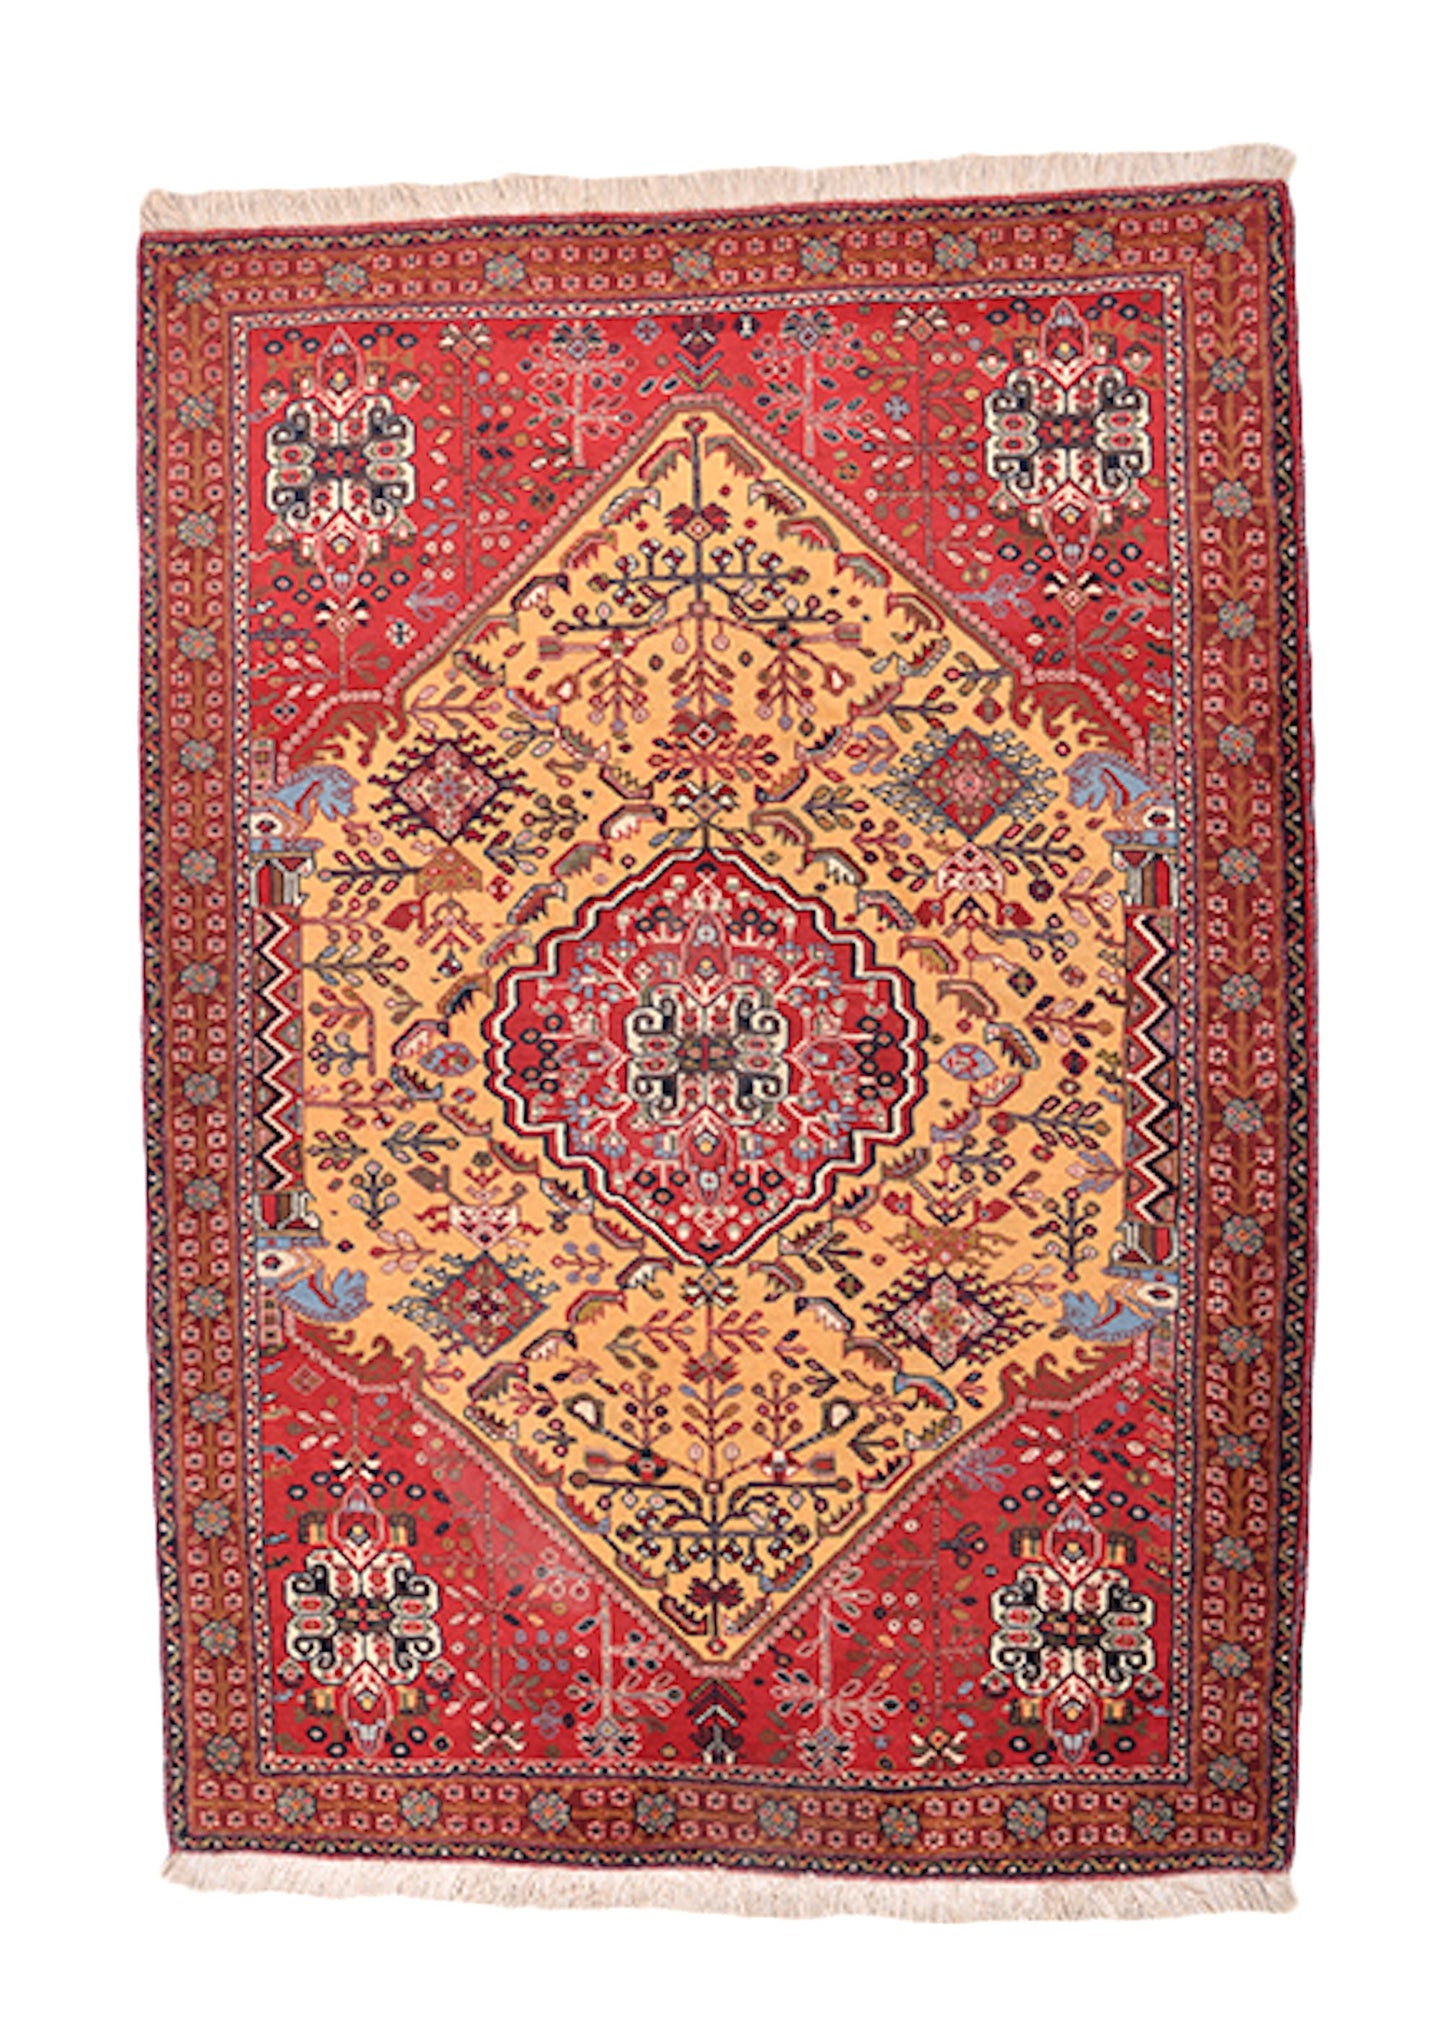 4 x 5 Red Caucasian Handmade Area Rug with Large Yellow Central Medallion